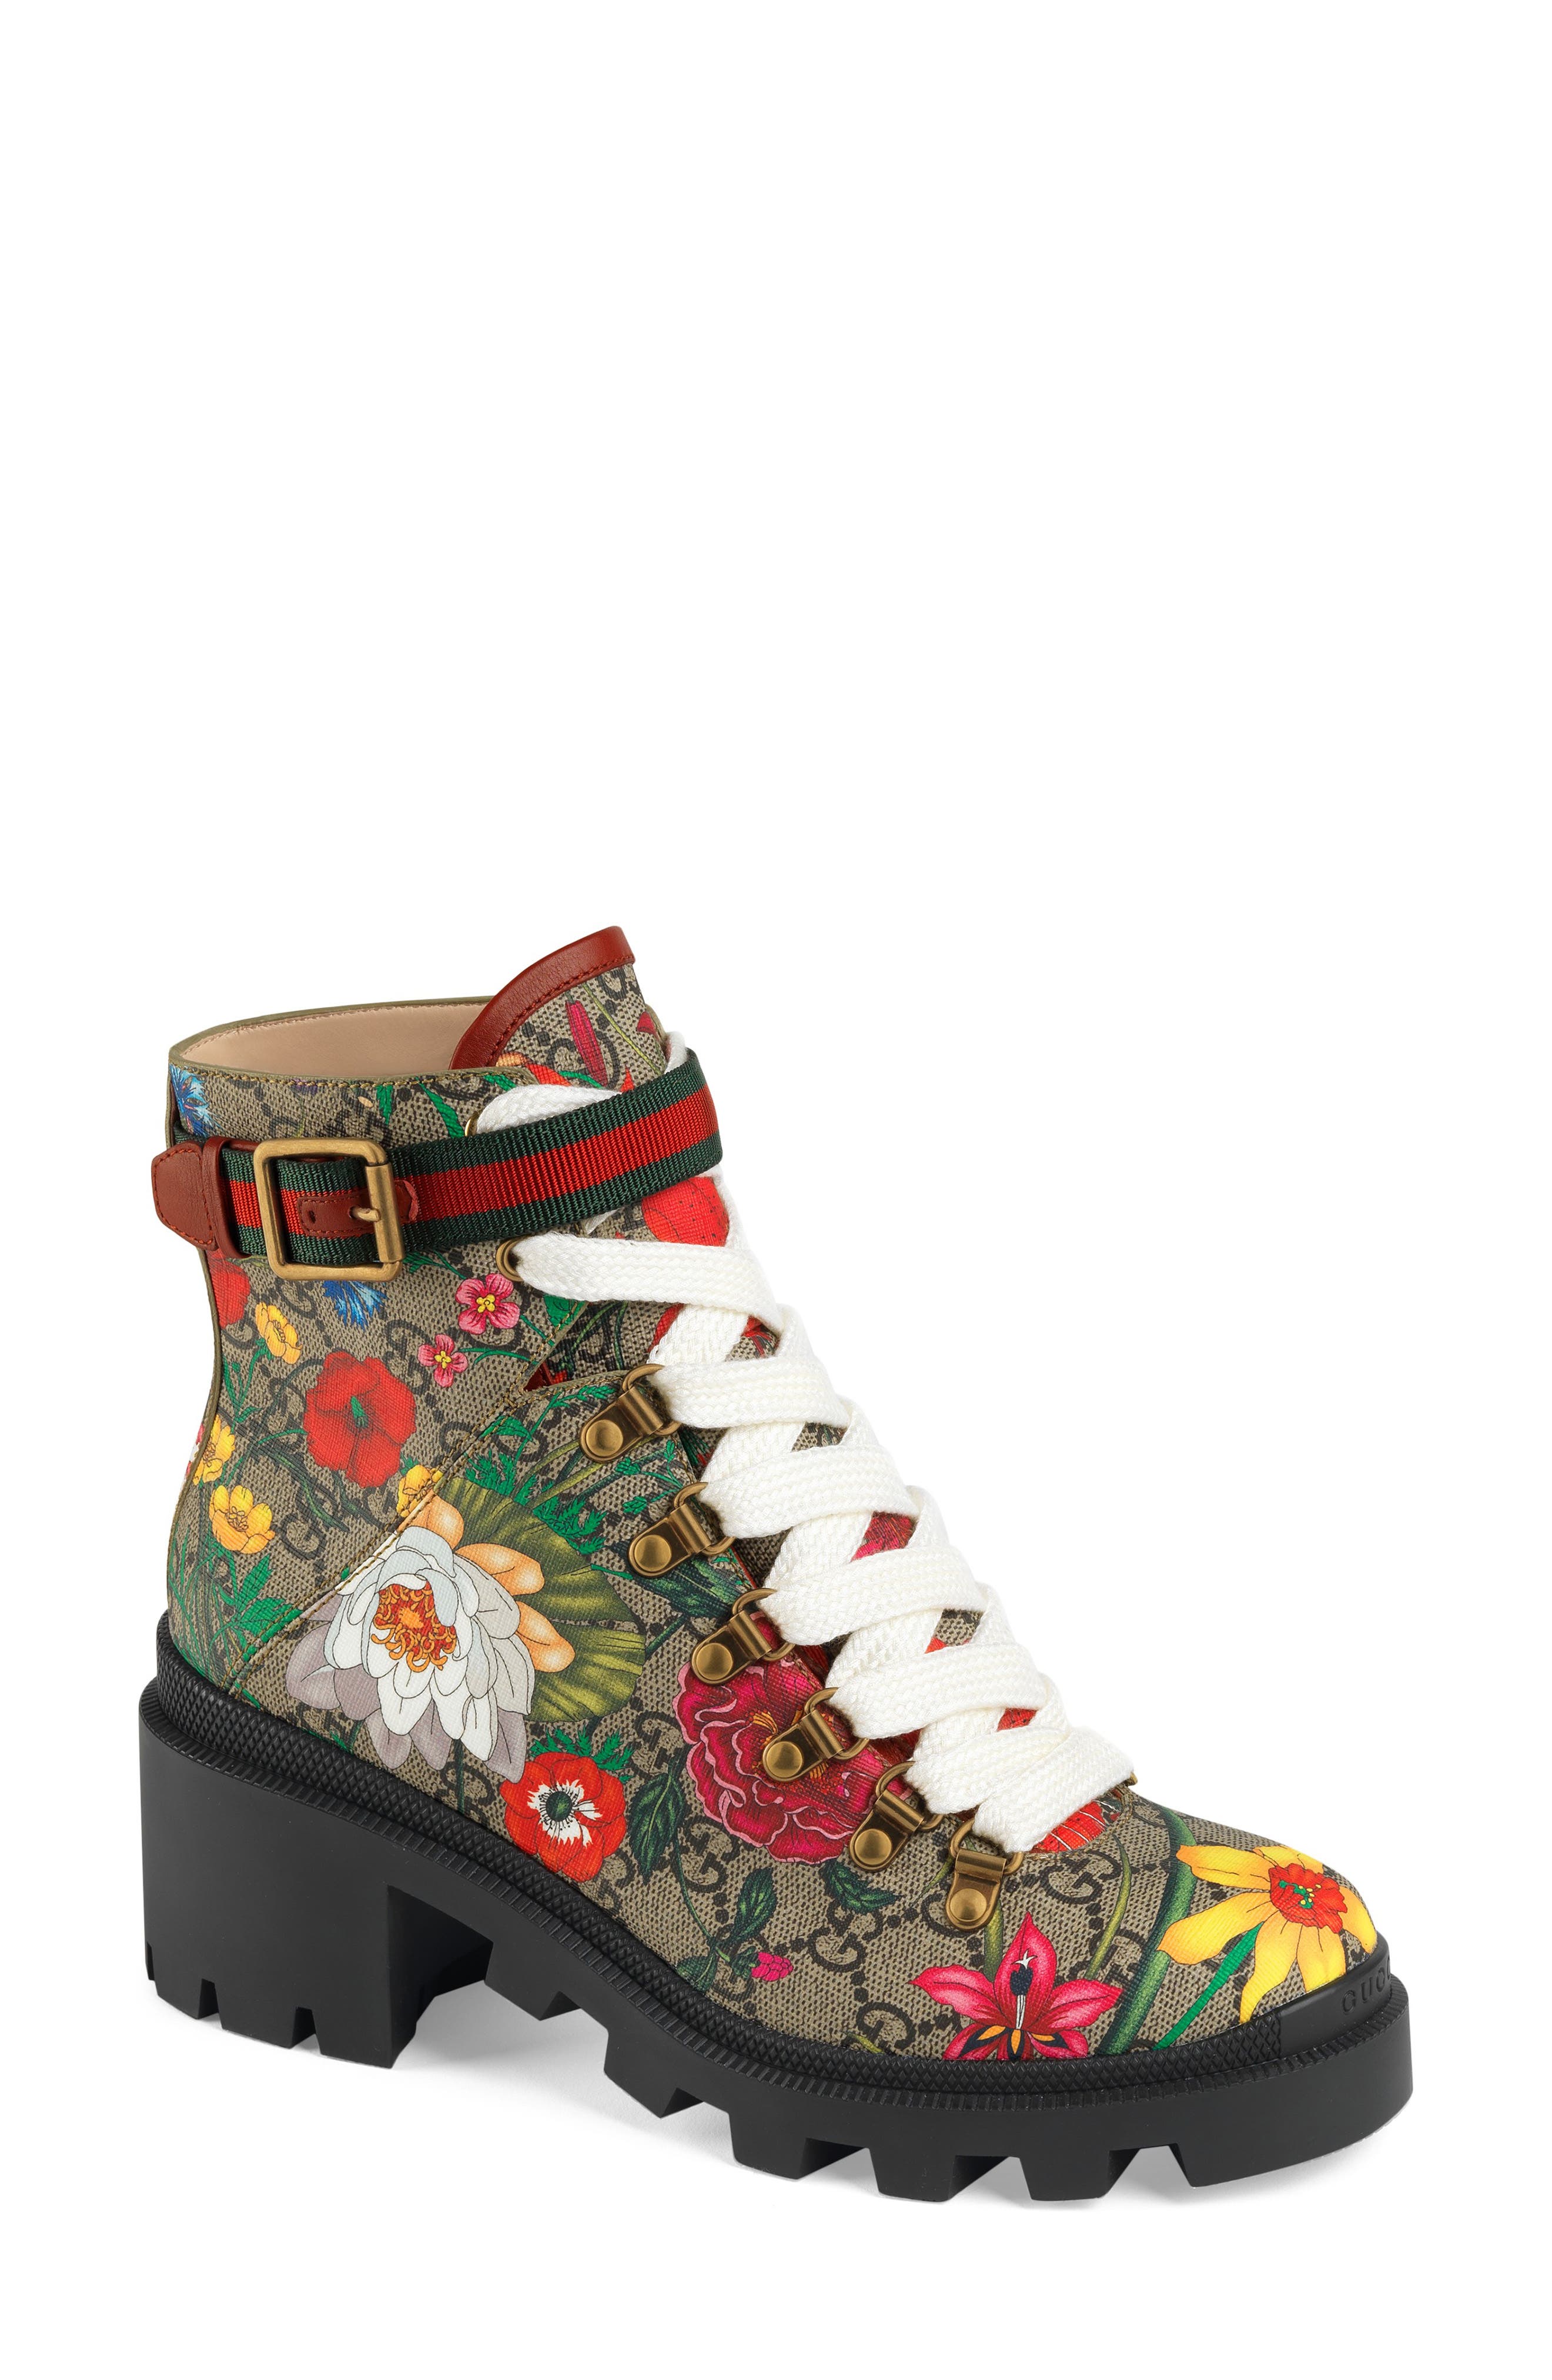 gucci women's snake boots